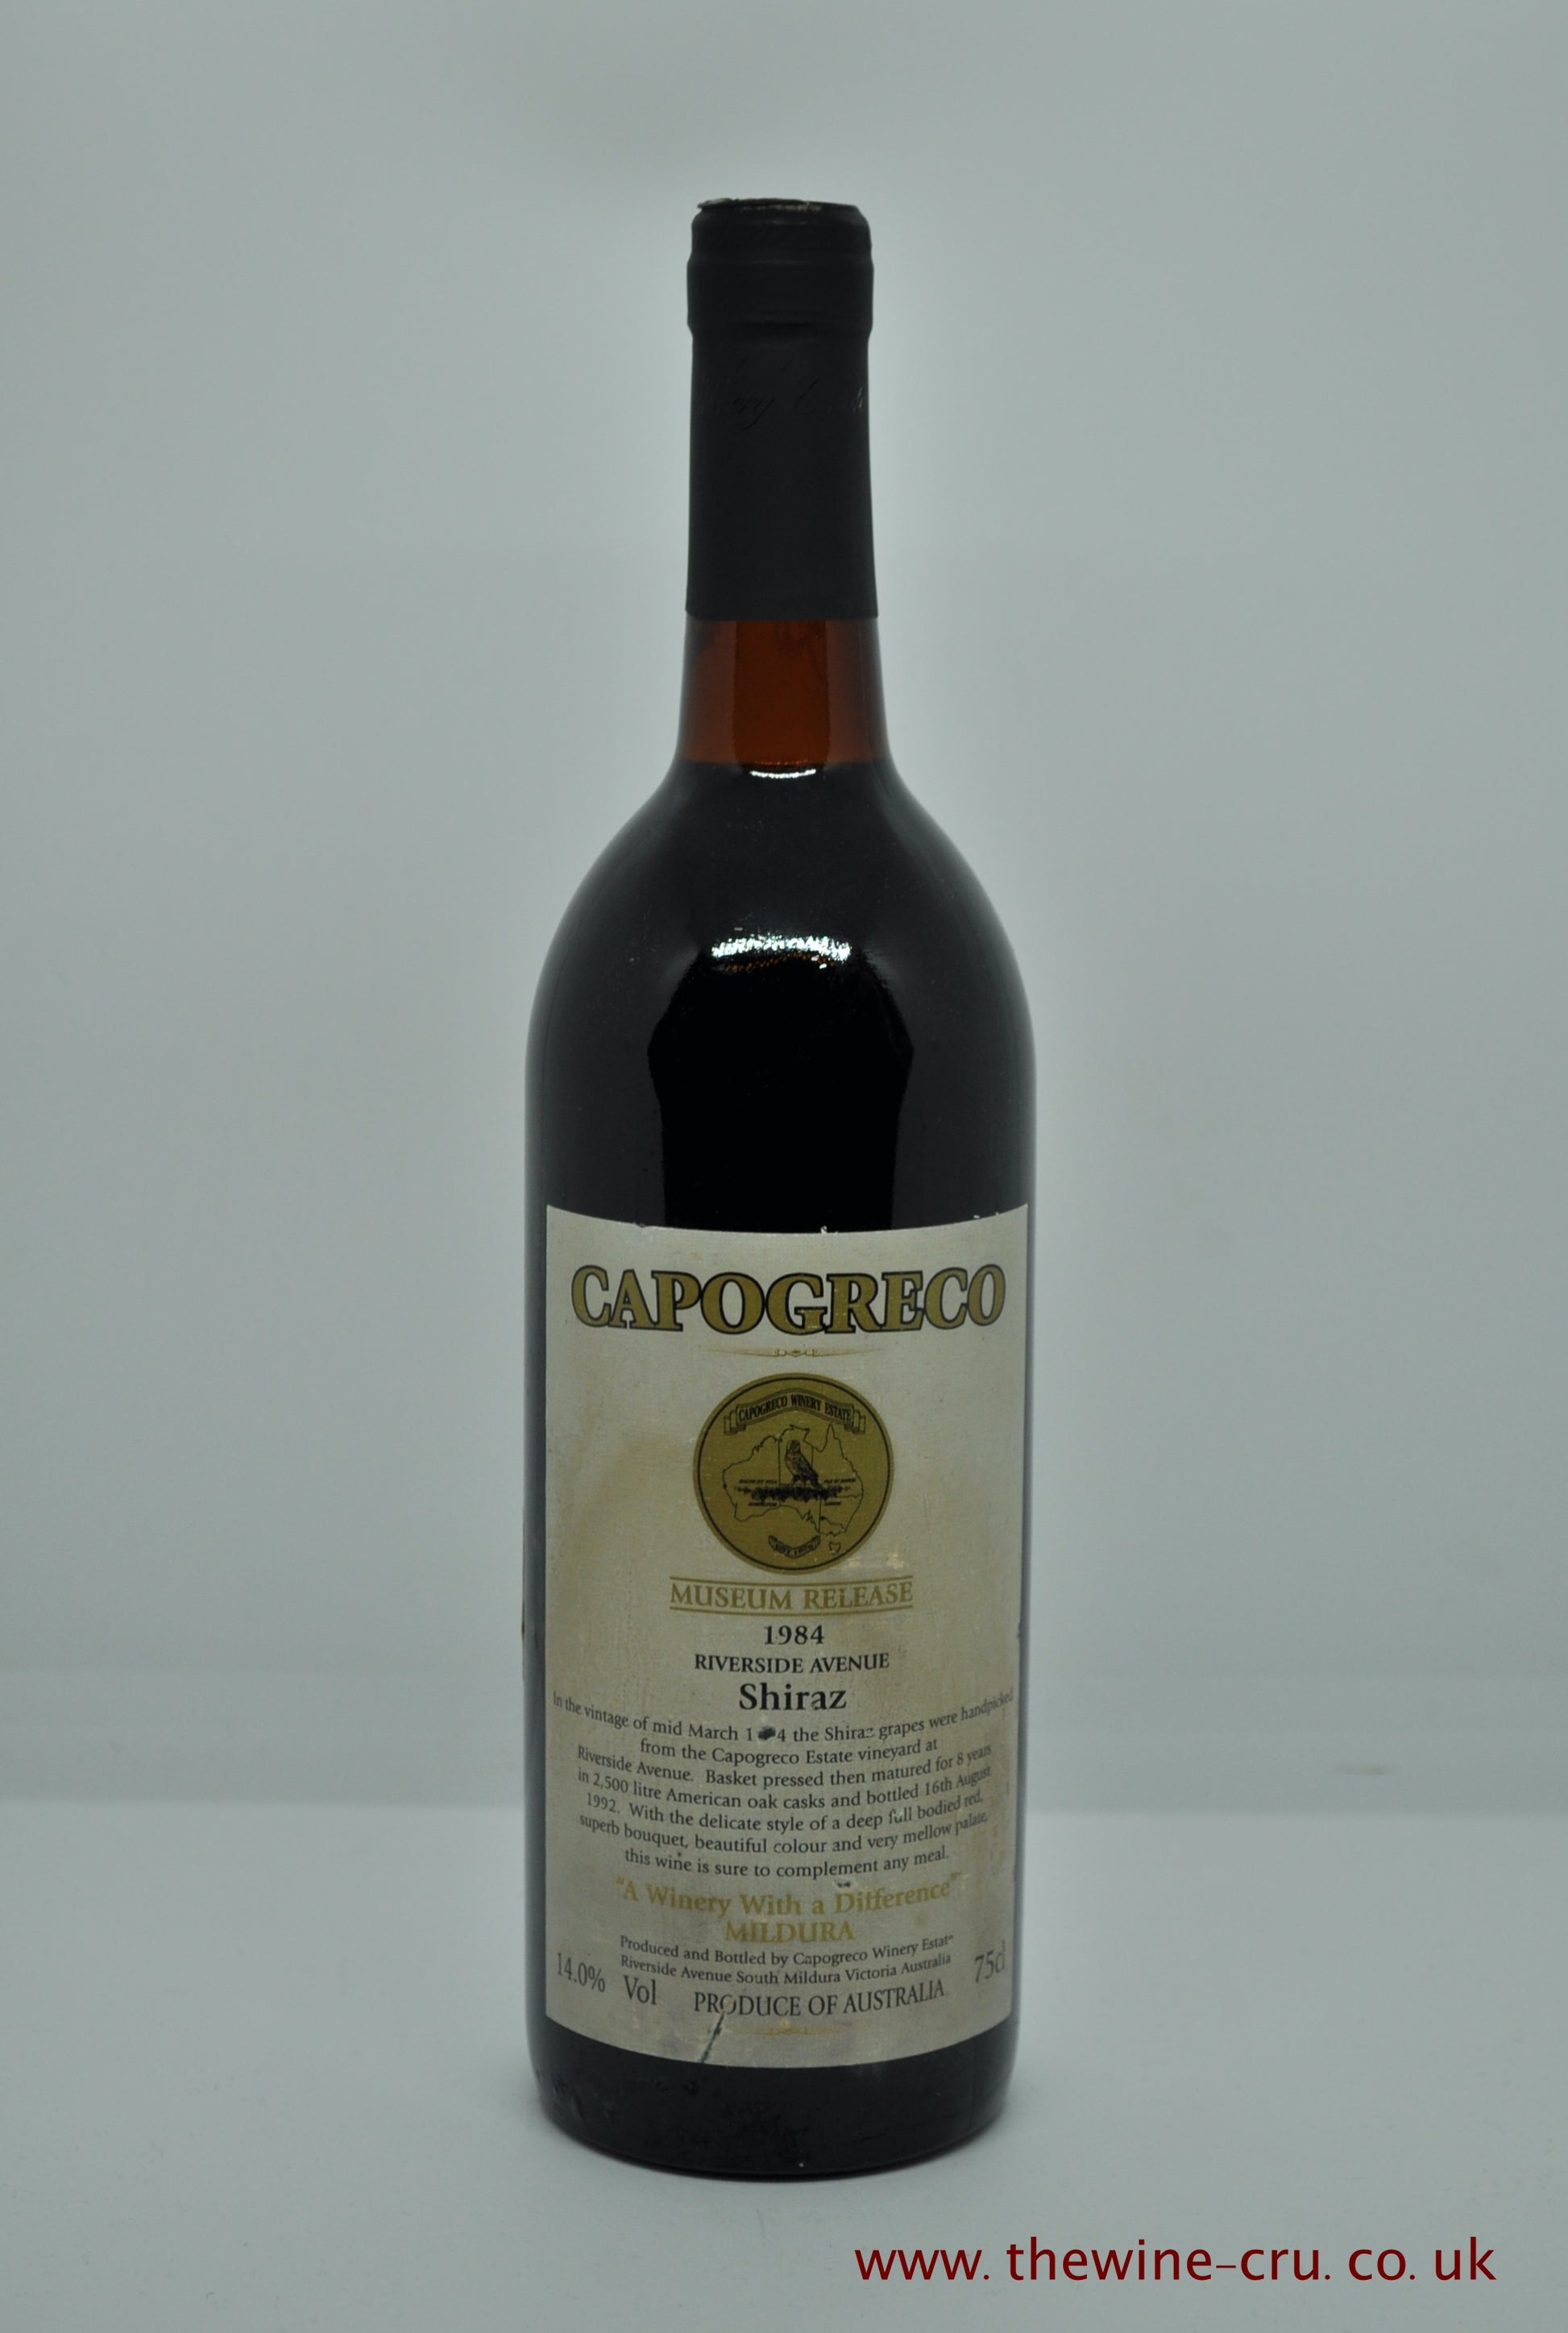 a single bottle of 1984 vintage red wine. Capogreco Riverside Avenue Shiraz 1984. Australia, Victoria. Capsule and label good. Wine level is very top shoulder. Immediate delivery. Free local delivery. Gift wrapping available.